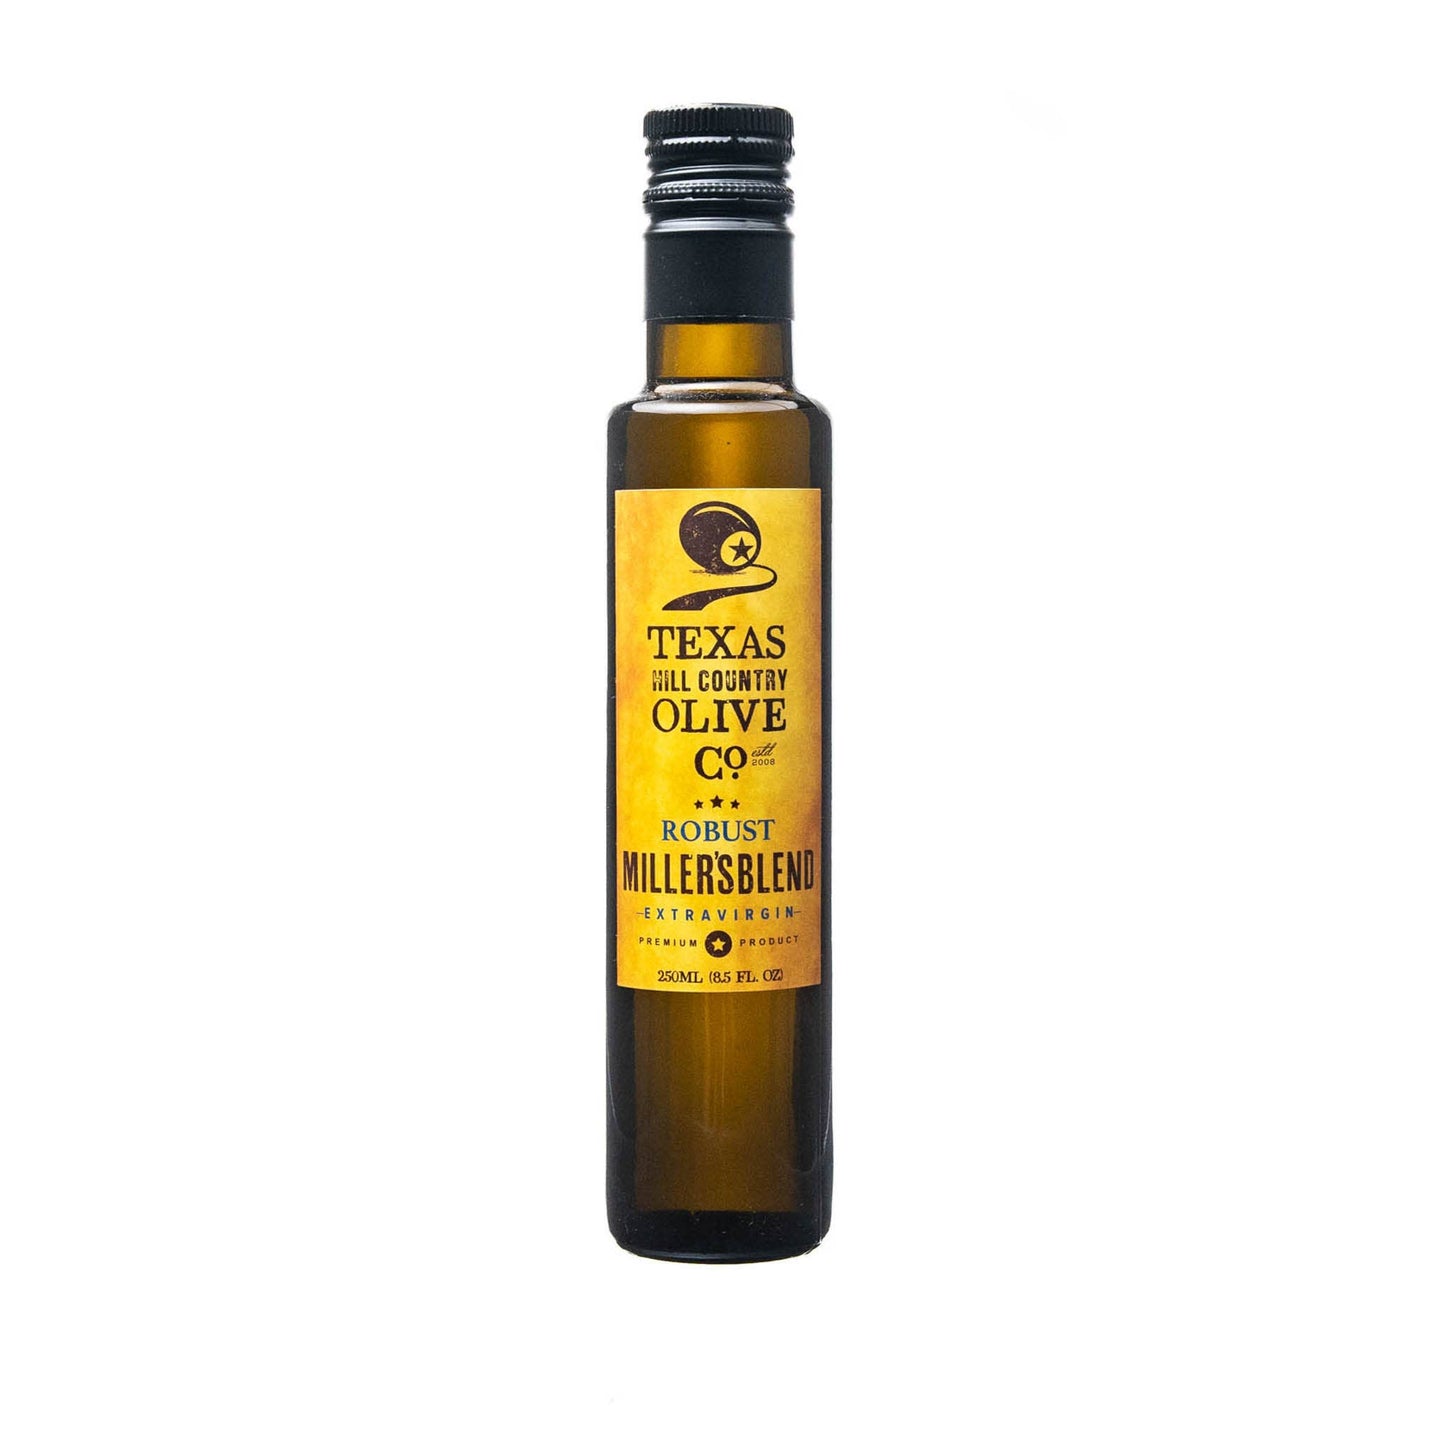 Texas Hill Country Olive Co. - Texas Miller's Blend Extra Virgin Olive Oil - 250ml